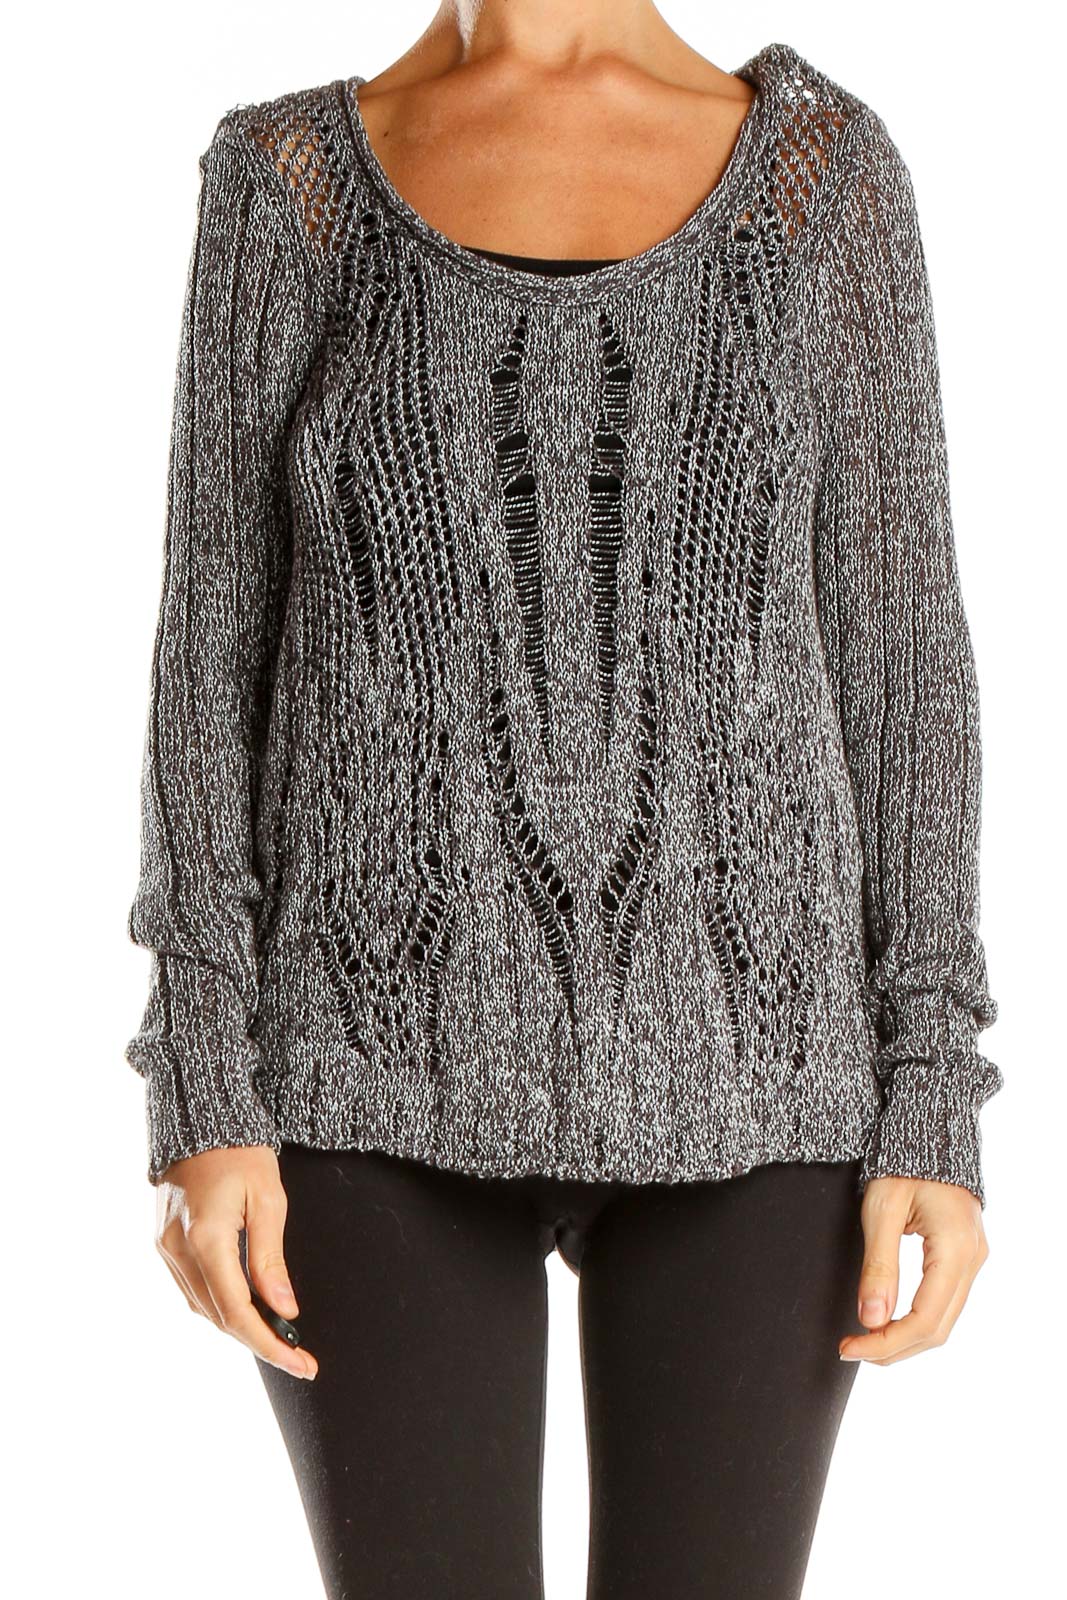 Gray Light Woven Top Front